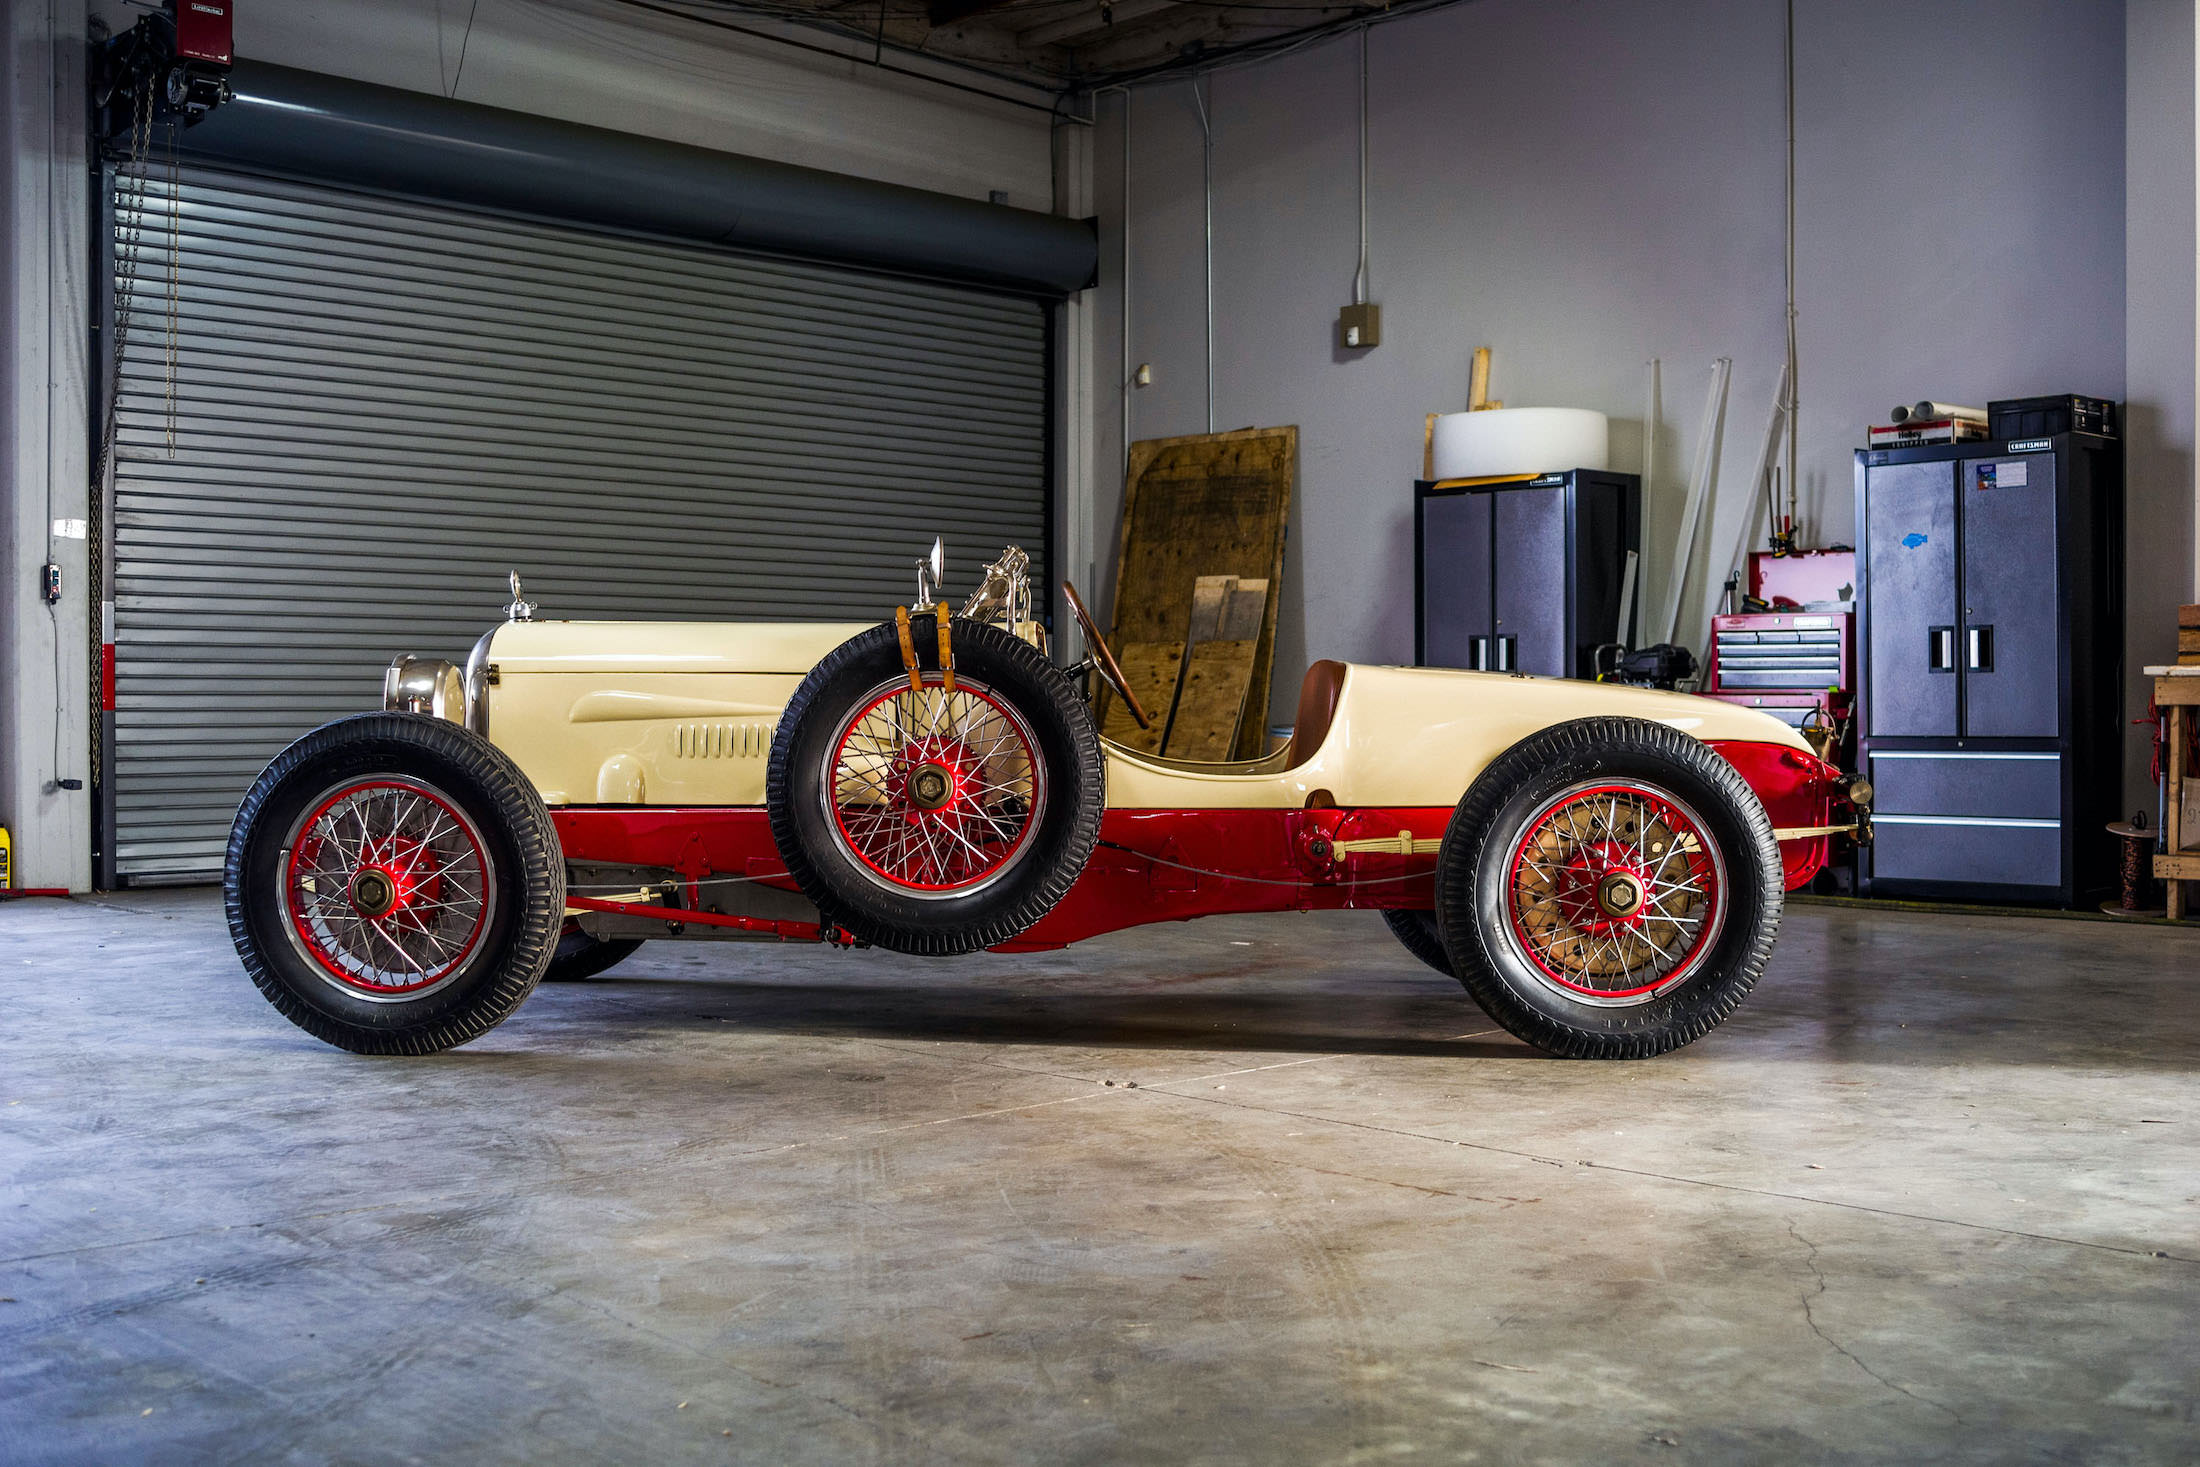 For Sale: Packard Twin Six 7.0 Litre V12 – A 104 Year Old Open